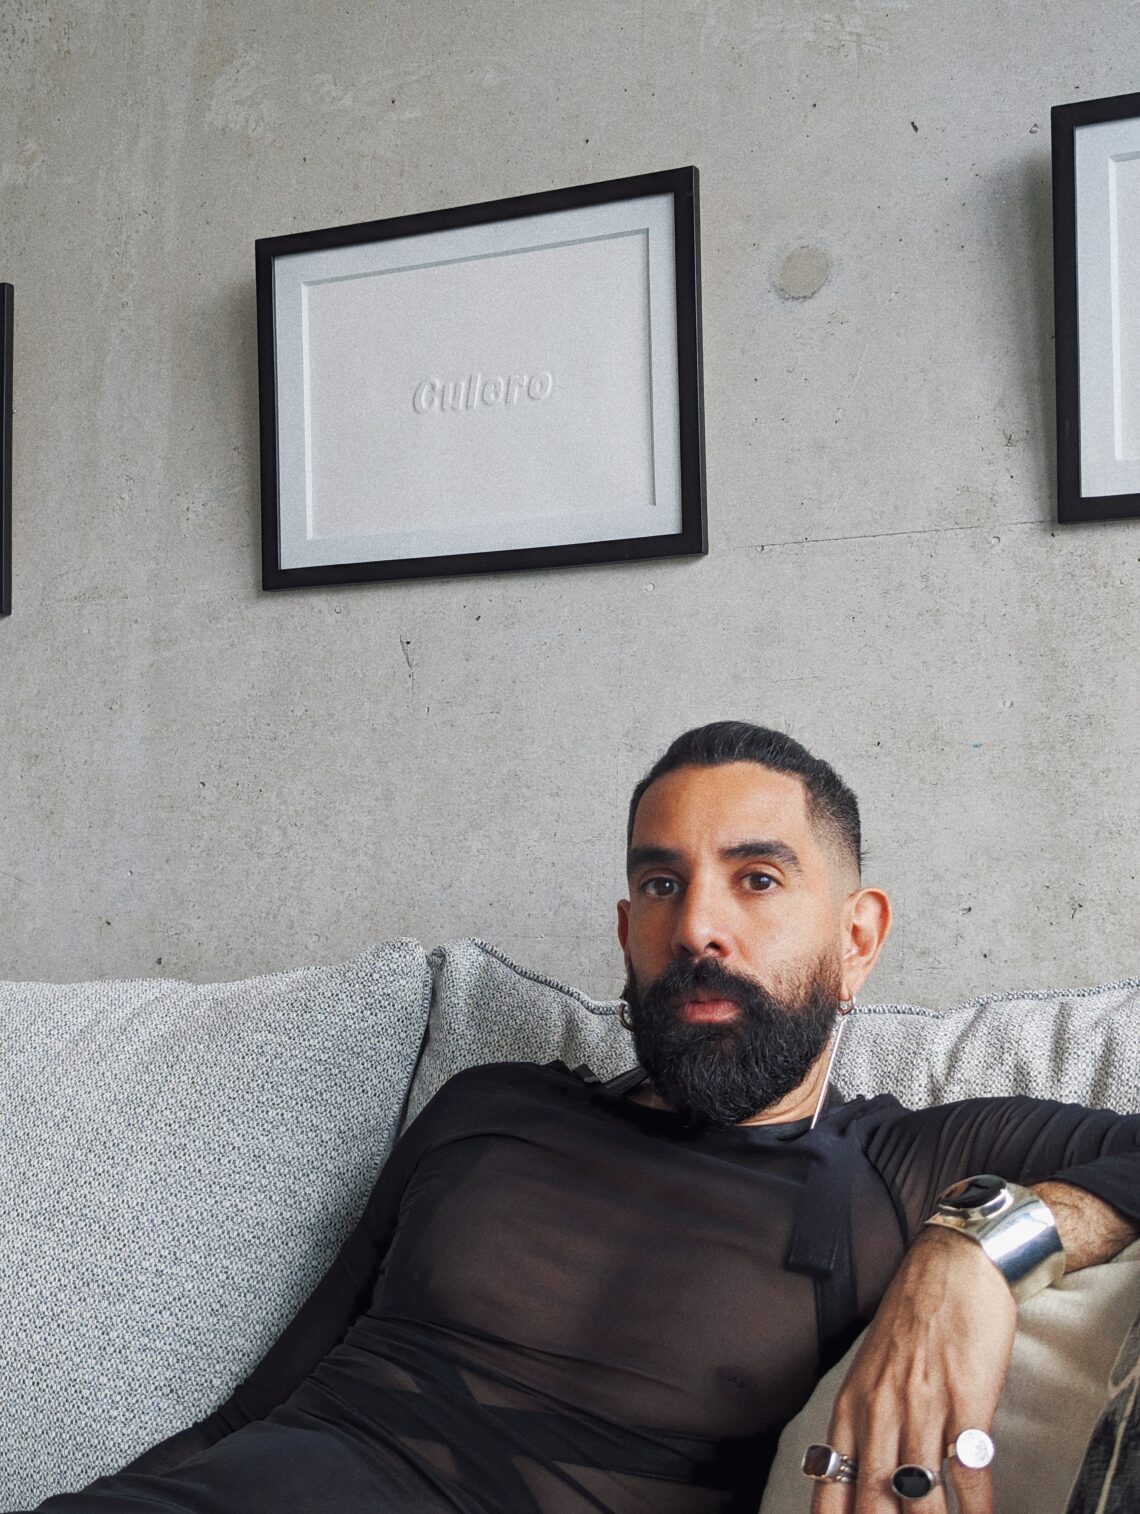 Armando Perla sitting on a white couch against a white wall. Armando has a dark coloured beard and short dark hair. They are wearing a black sheer top with solid black crisscrossing ties. They are wearing a silver watch and rings while leaning against the arm of the couch.